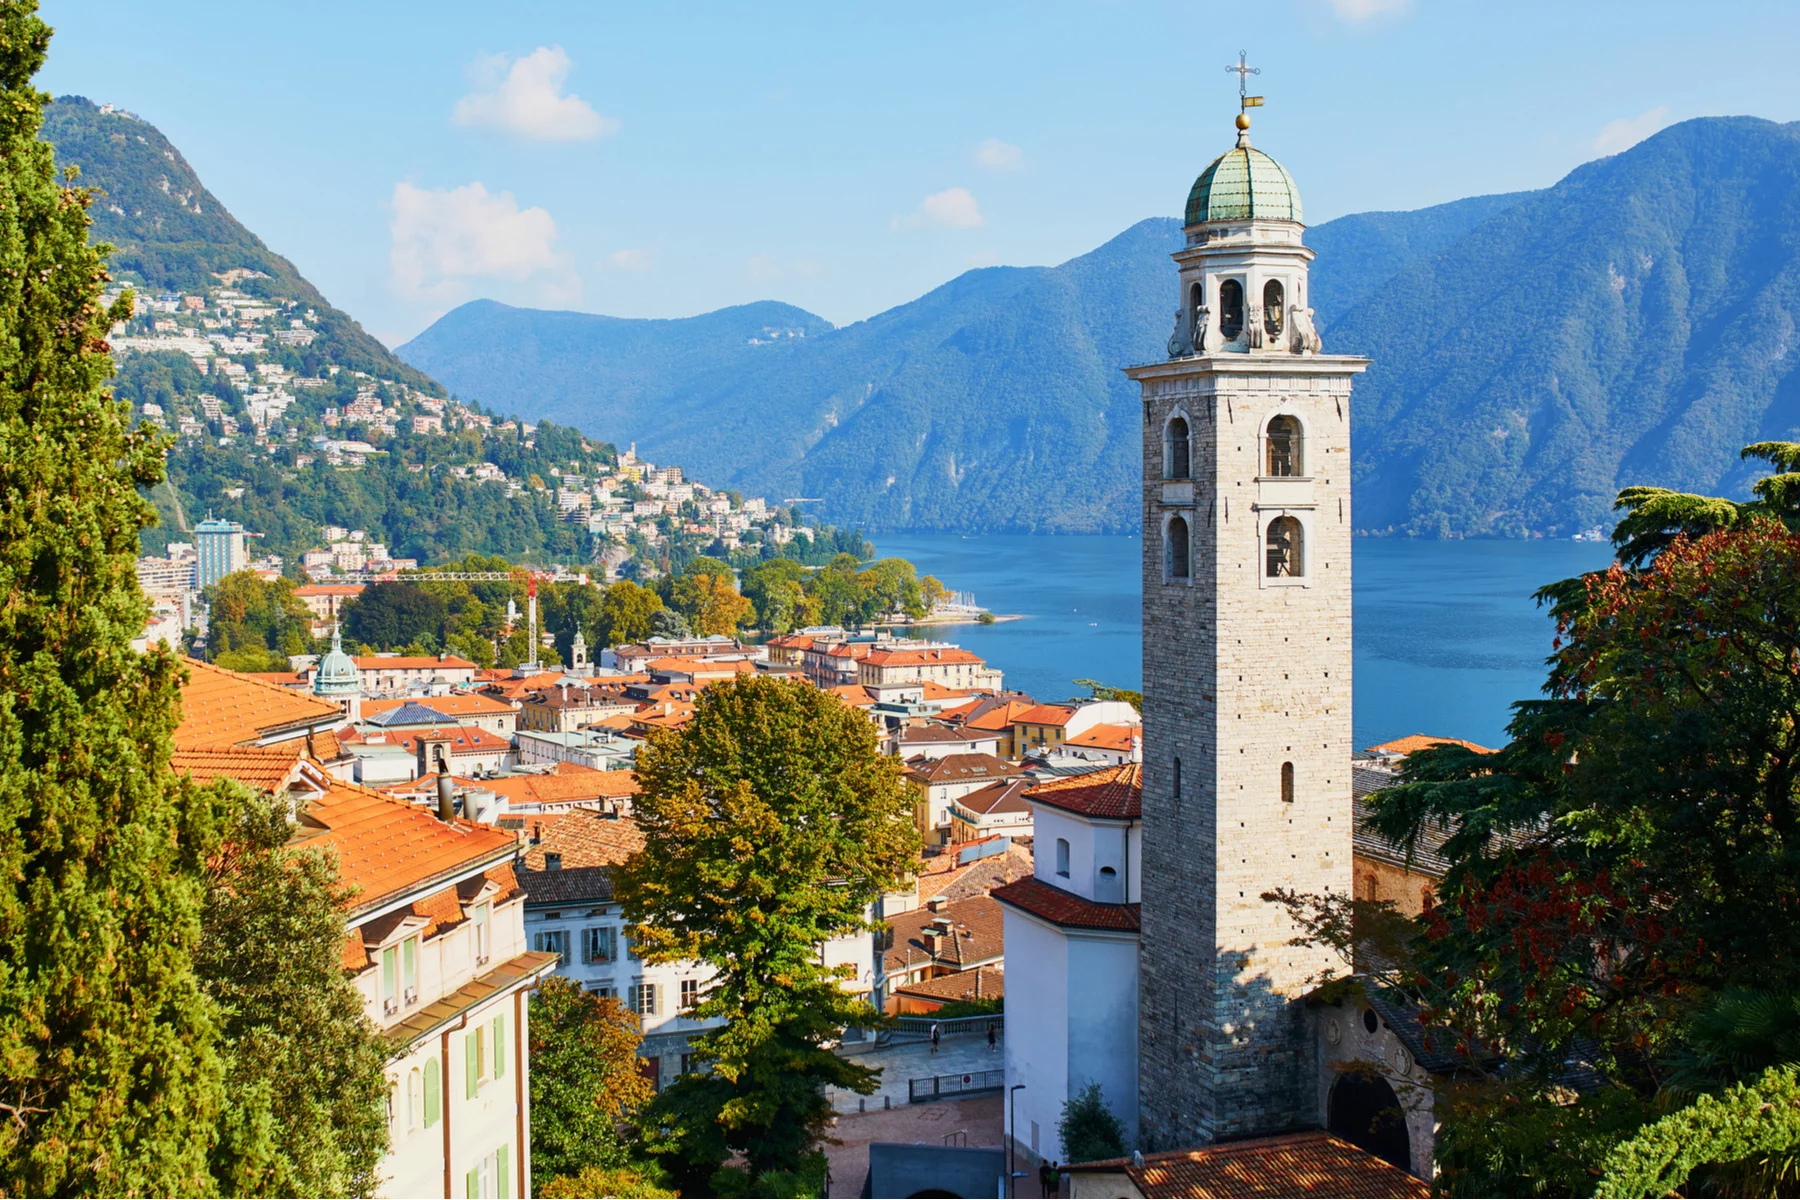 The old town of Lugano